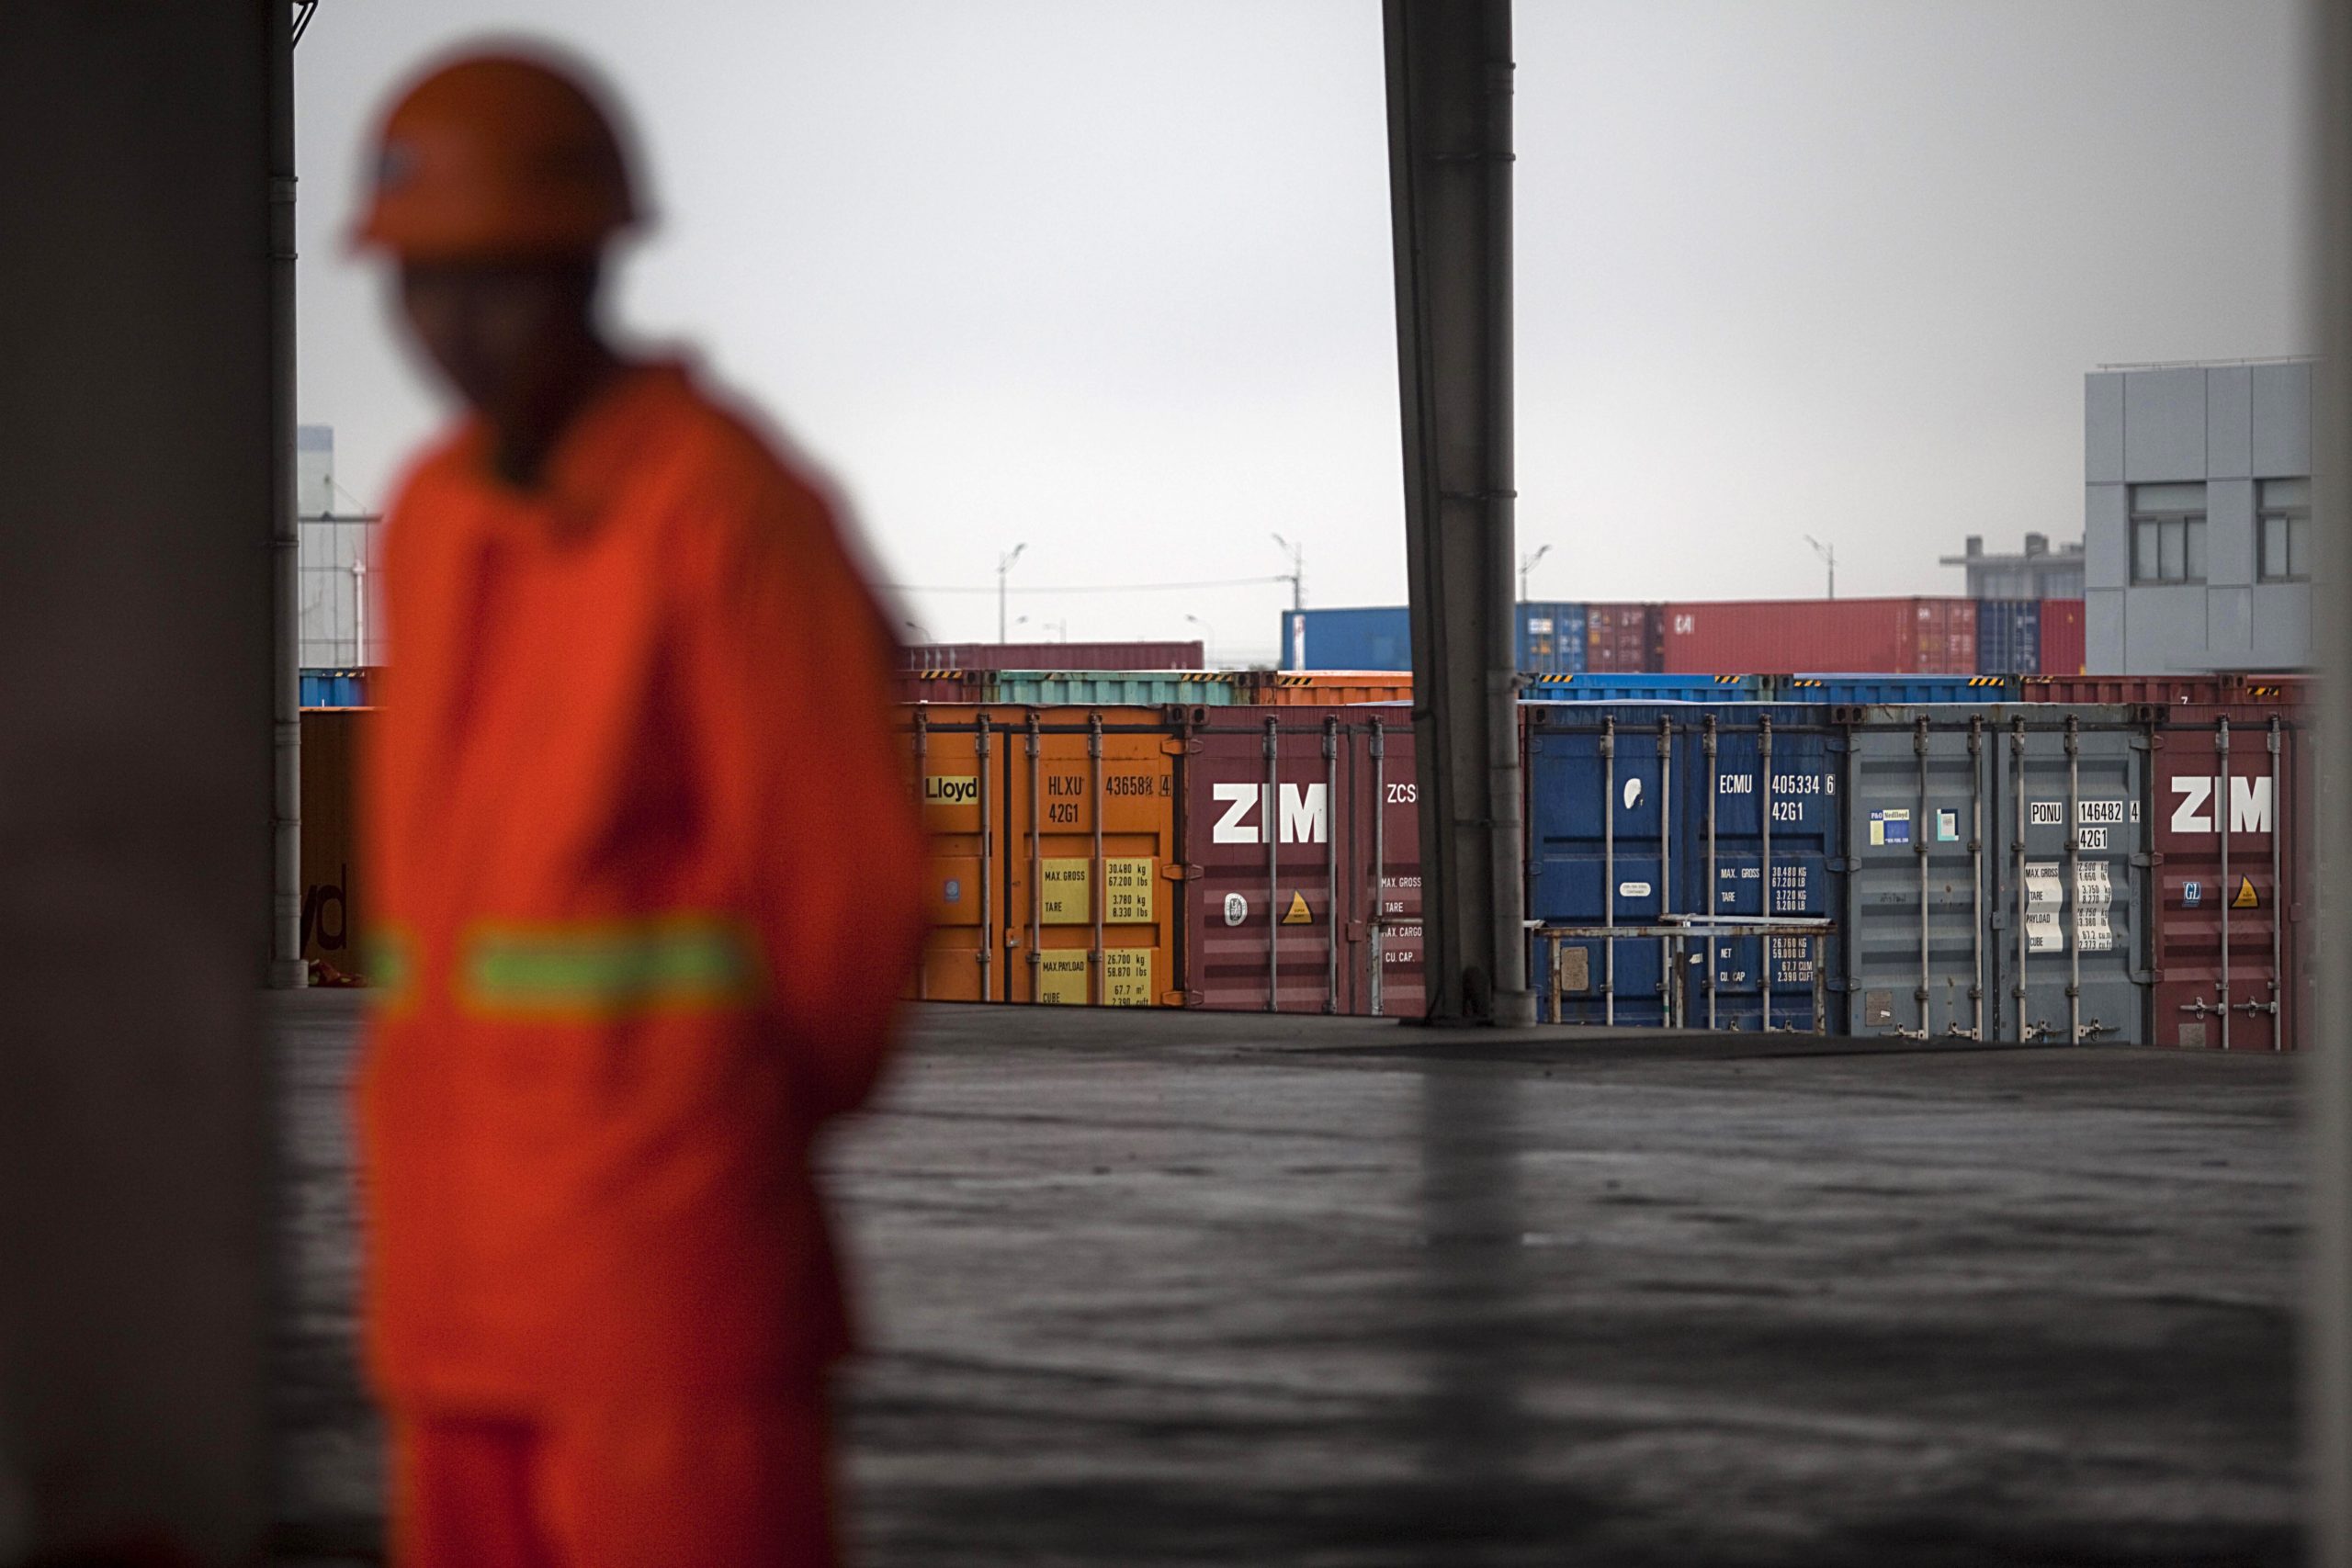 A worker stands in the container clearance area at the Yangshan Deep-water Port in Shanghai, China, 7 December 2011.

China and the United States kicked off a Megaports Initiative pilot project in Shanghai on Wednesday (7 December 2011), amid efforts to improve security via radiation checks for cargo carriers at the citys Yangshan Port. The initiative, an important part of the China-US cooperation on fighting terrorism, is aimed at preventing the illegal transport of nuclear and other radioactive materials by installing detection systems in relevant ports.